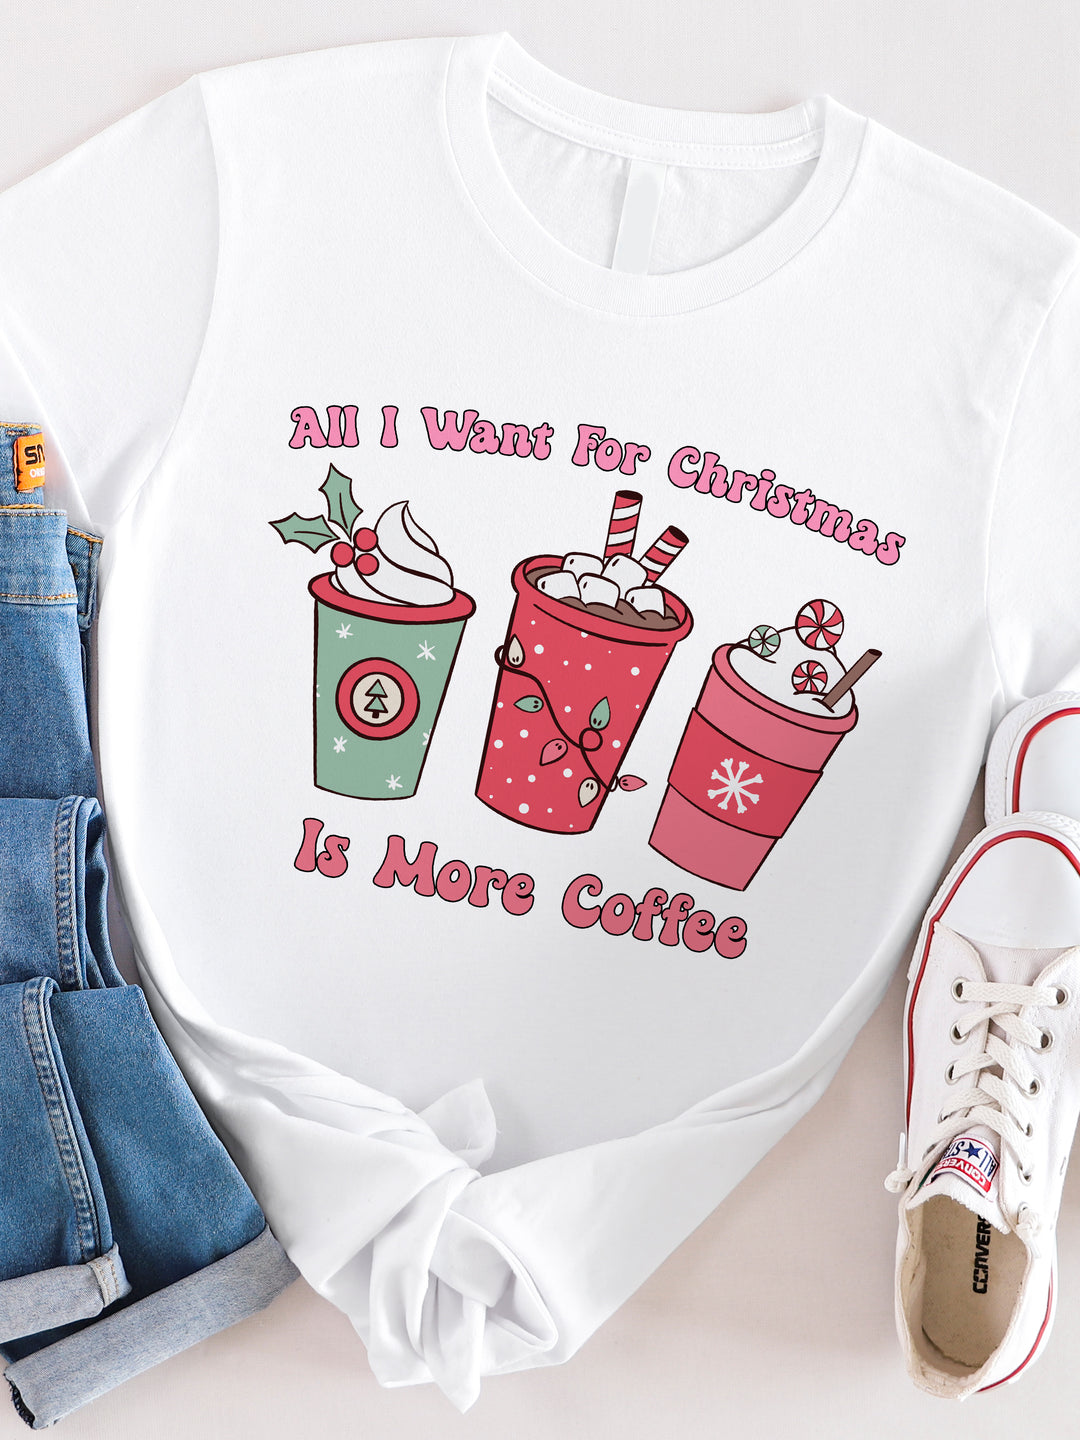 All I want for Christmas is more Coffee Graphic Tee